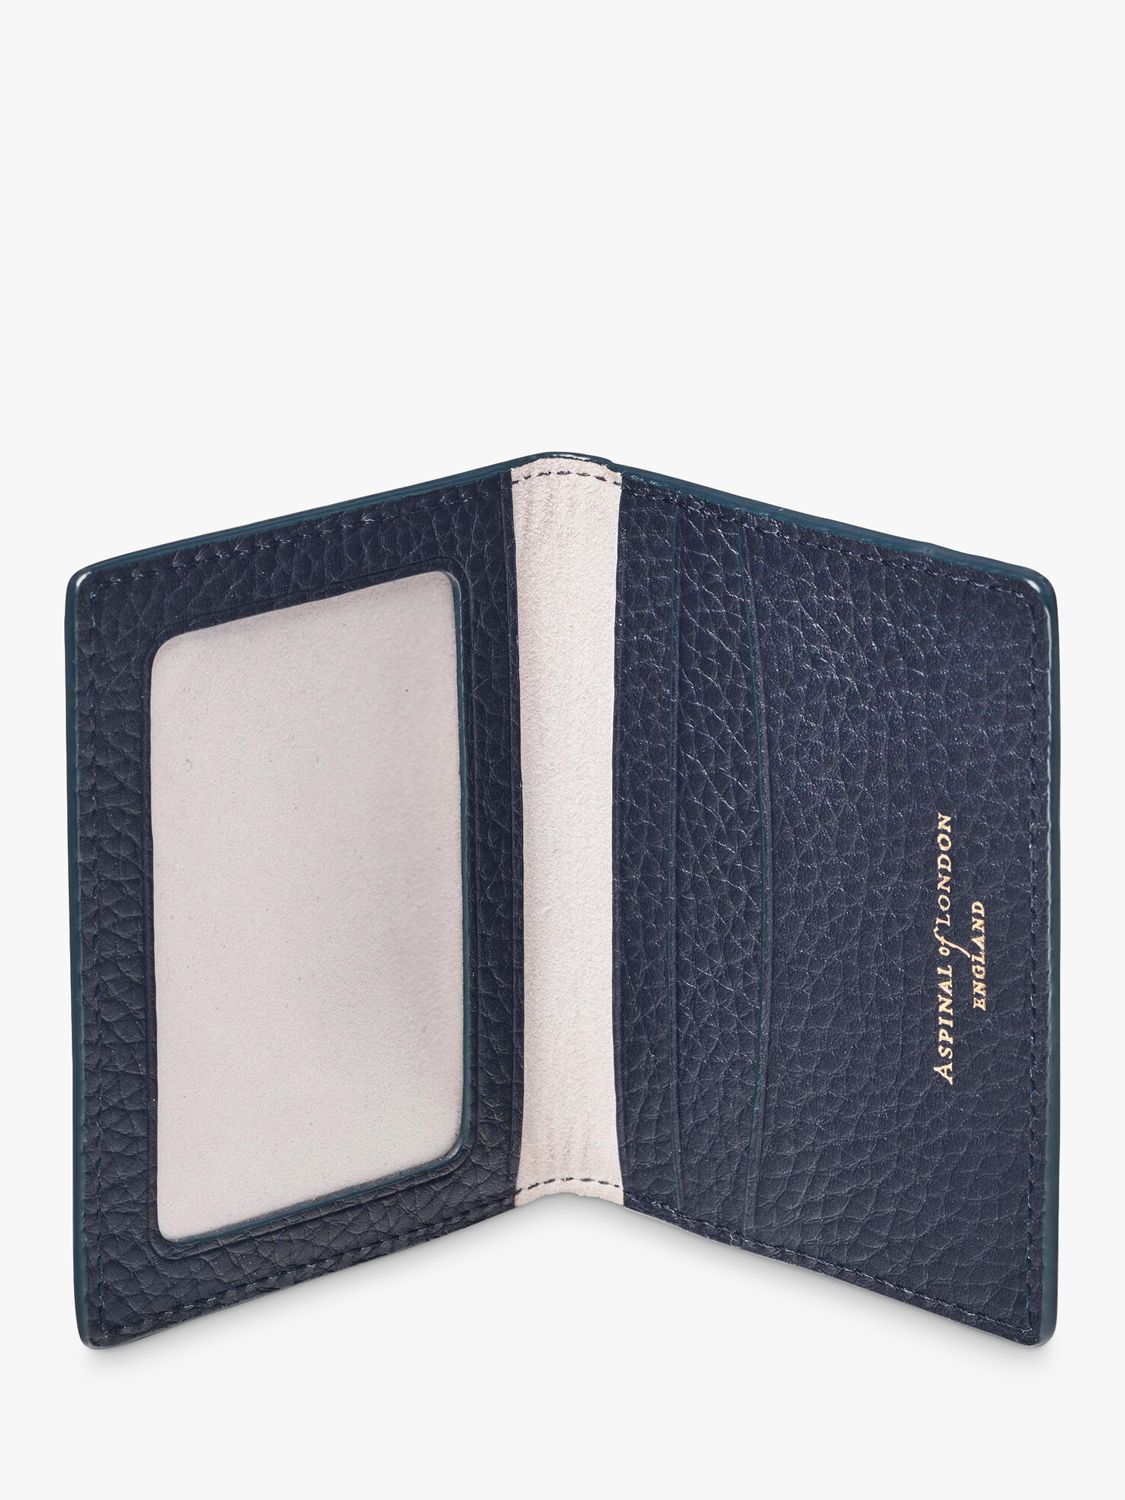 Aspinal of London ID and Travel Card Holder, Navy